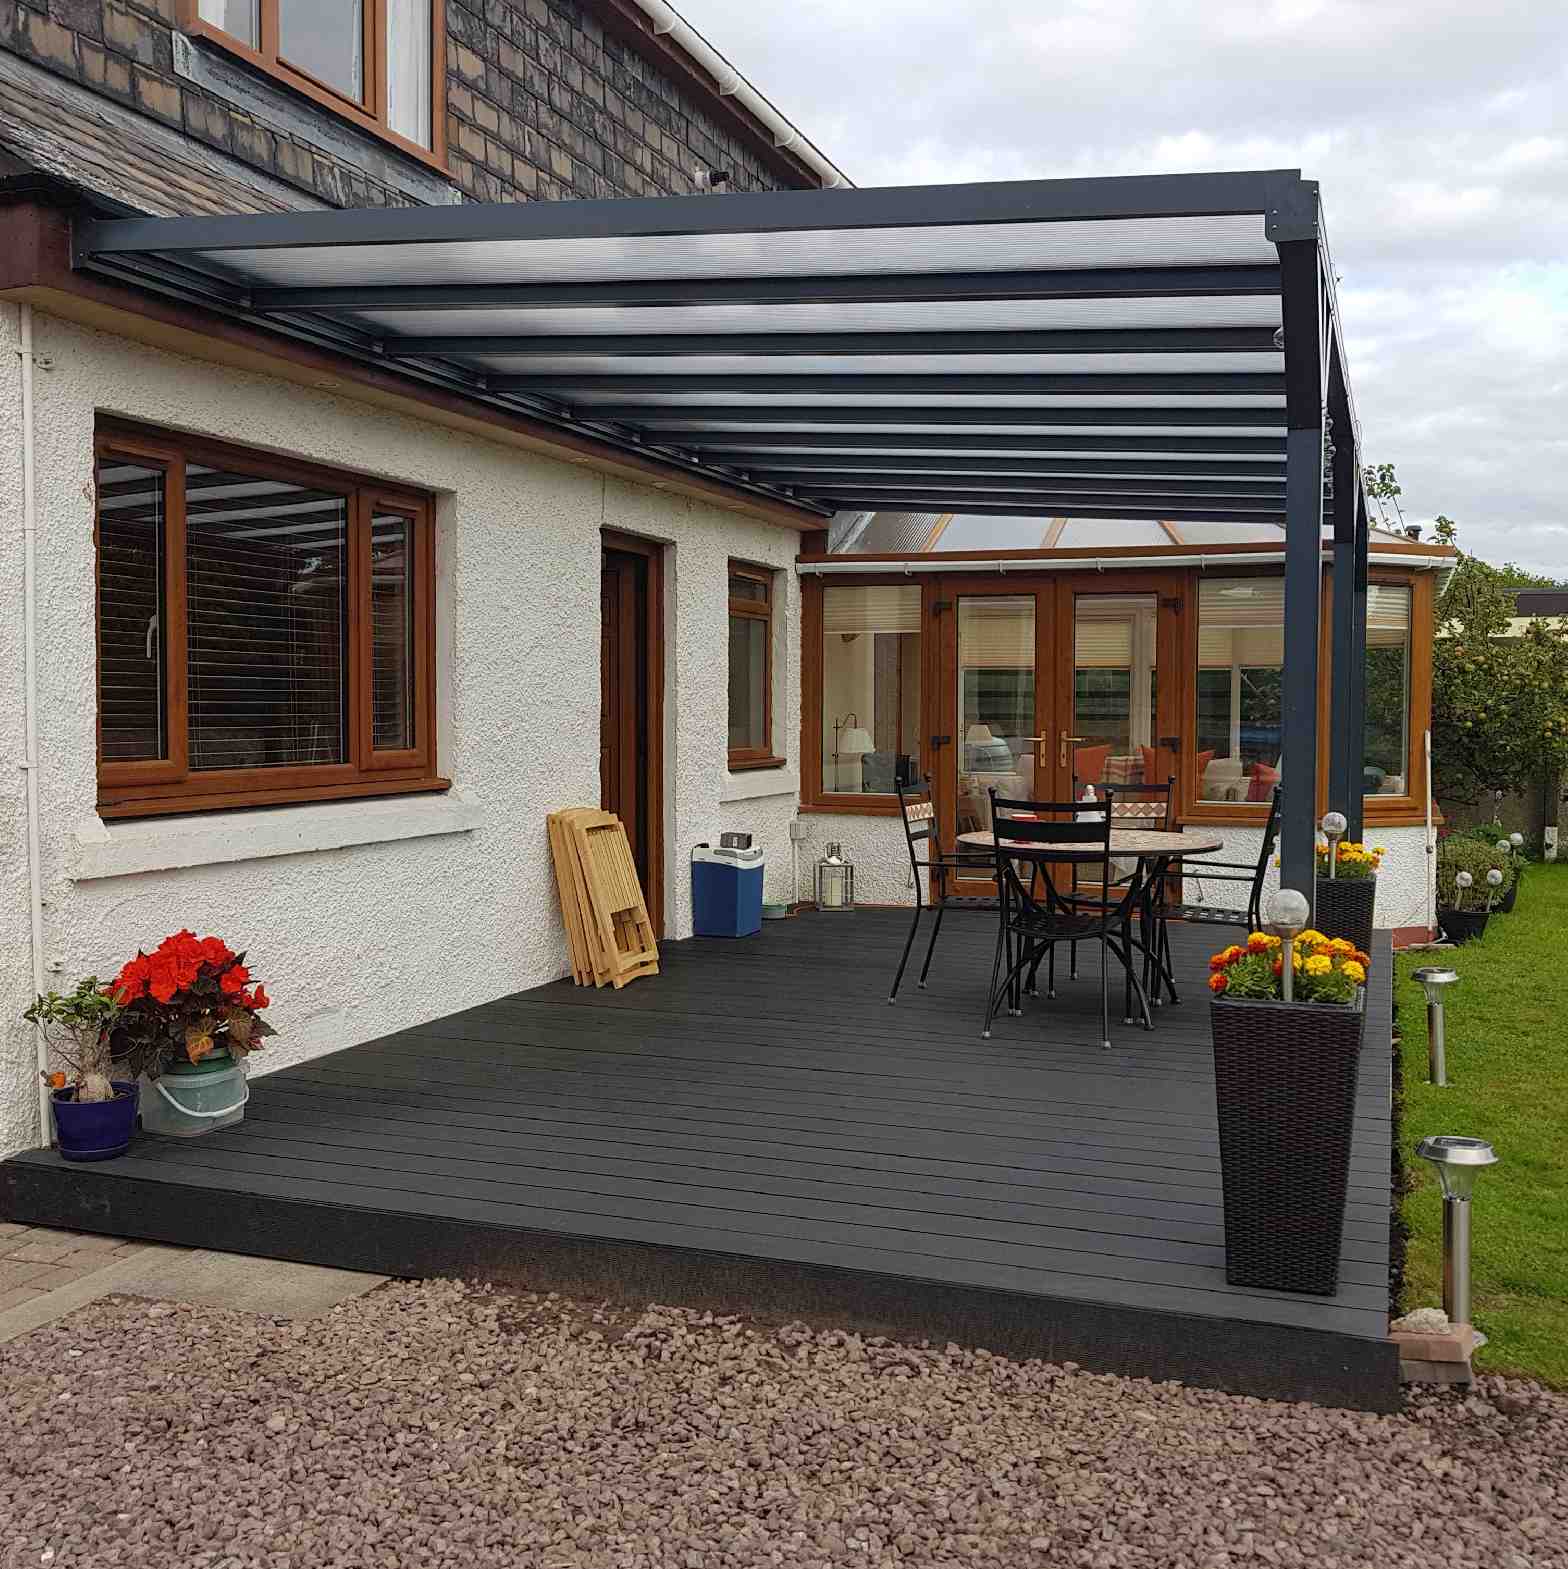 Buy Omega Verandah, Anthracite Grey, 16mm Polycarbonate Glazing - 4.2m (W) x 4.0m (P), (3) Supporting Posts online today